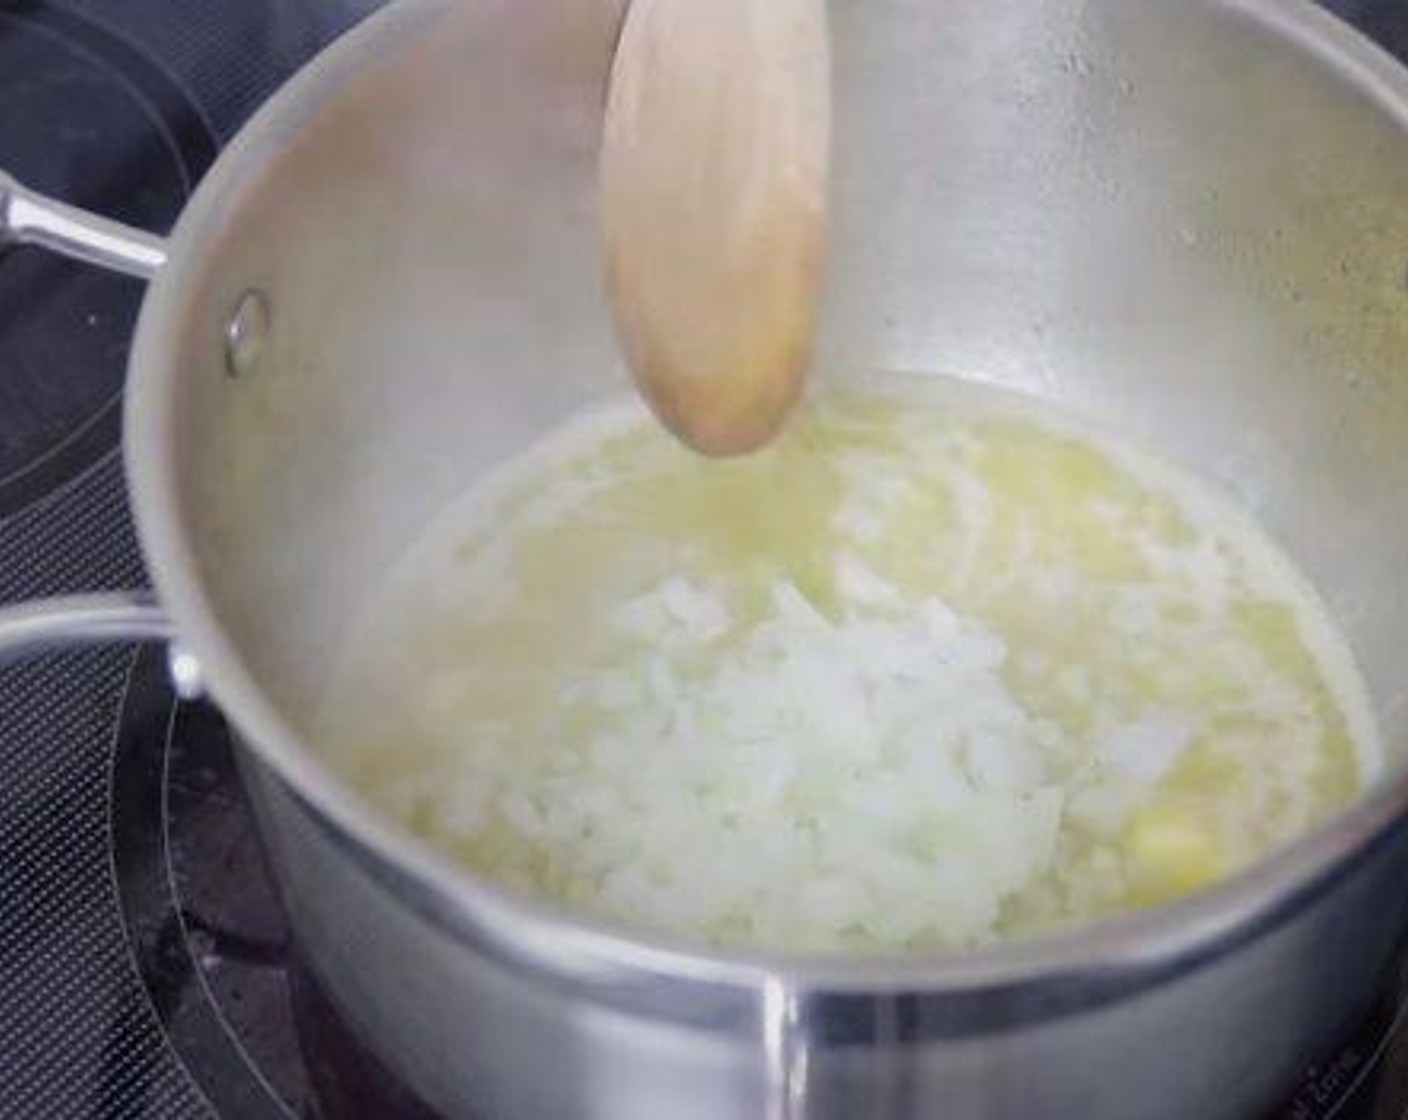 step 2 Melt the Butter (1/3 cup) and add Yellow Onion (1/2 cup) and cook for 3-5 minutes or until crisp-tender.